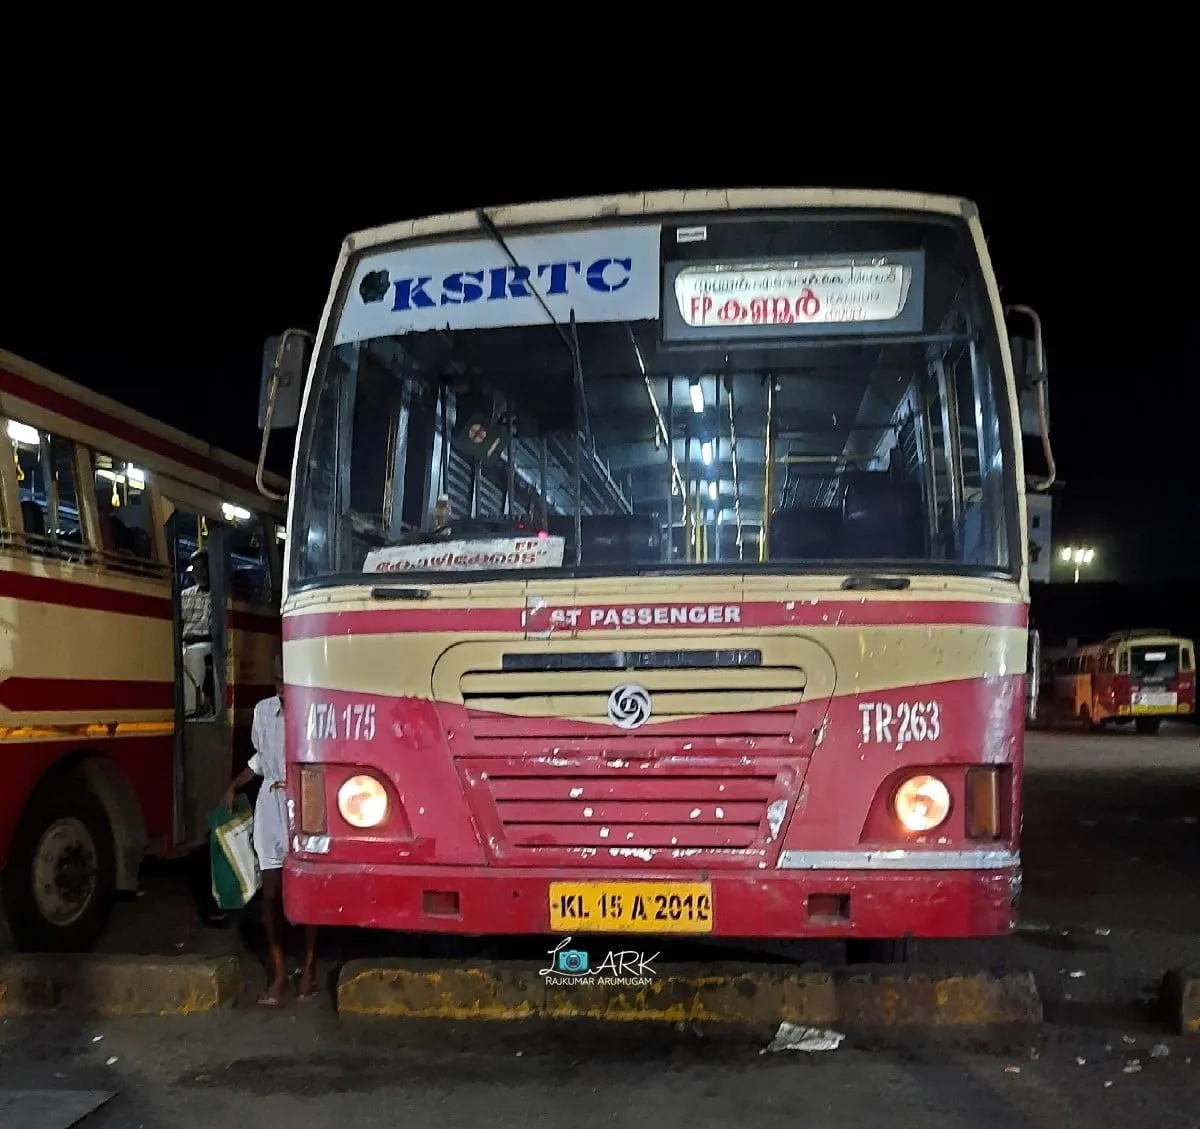 KSRTC ATA 175 Kannur - Thrissur - Palappilly Fast Passenger Bus Timings